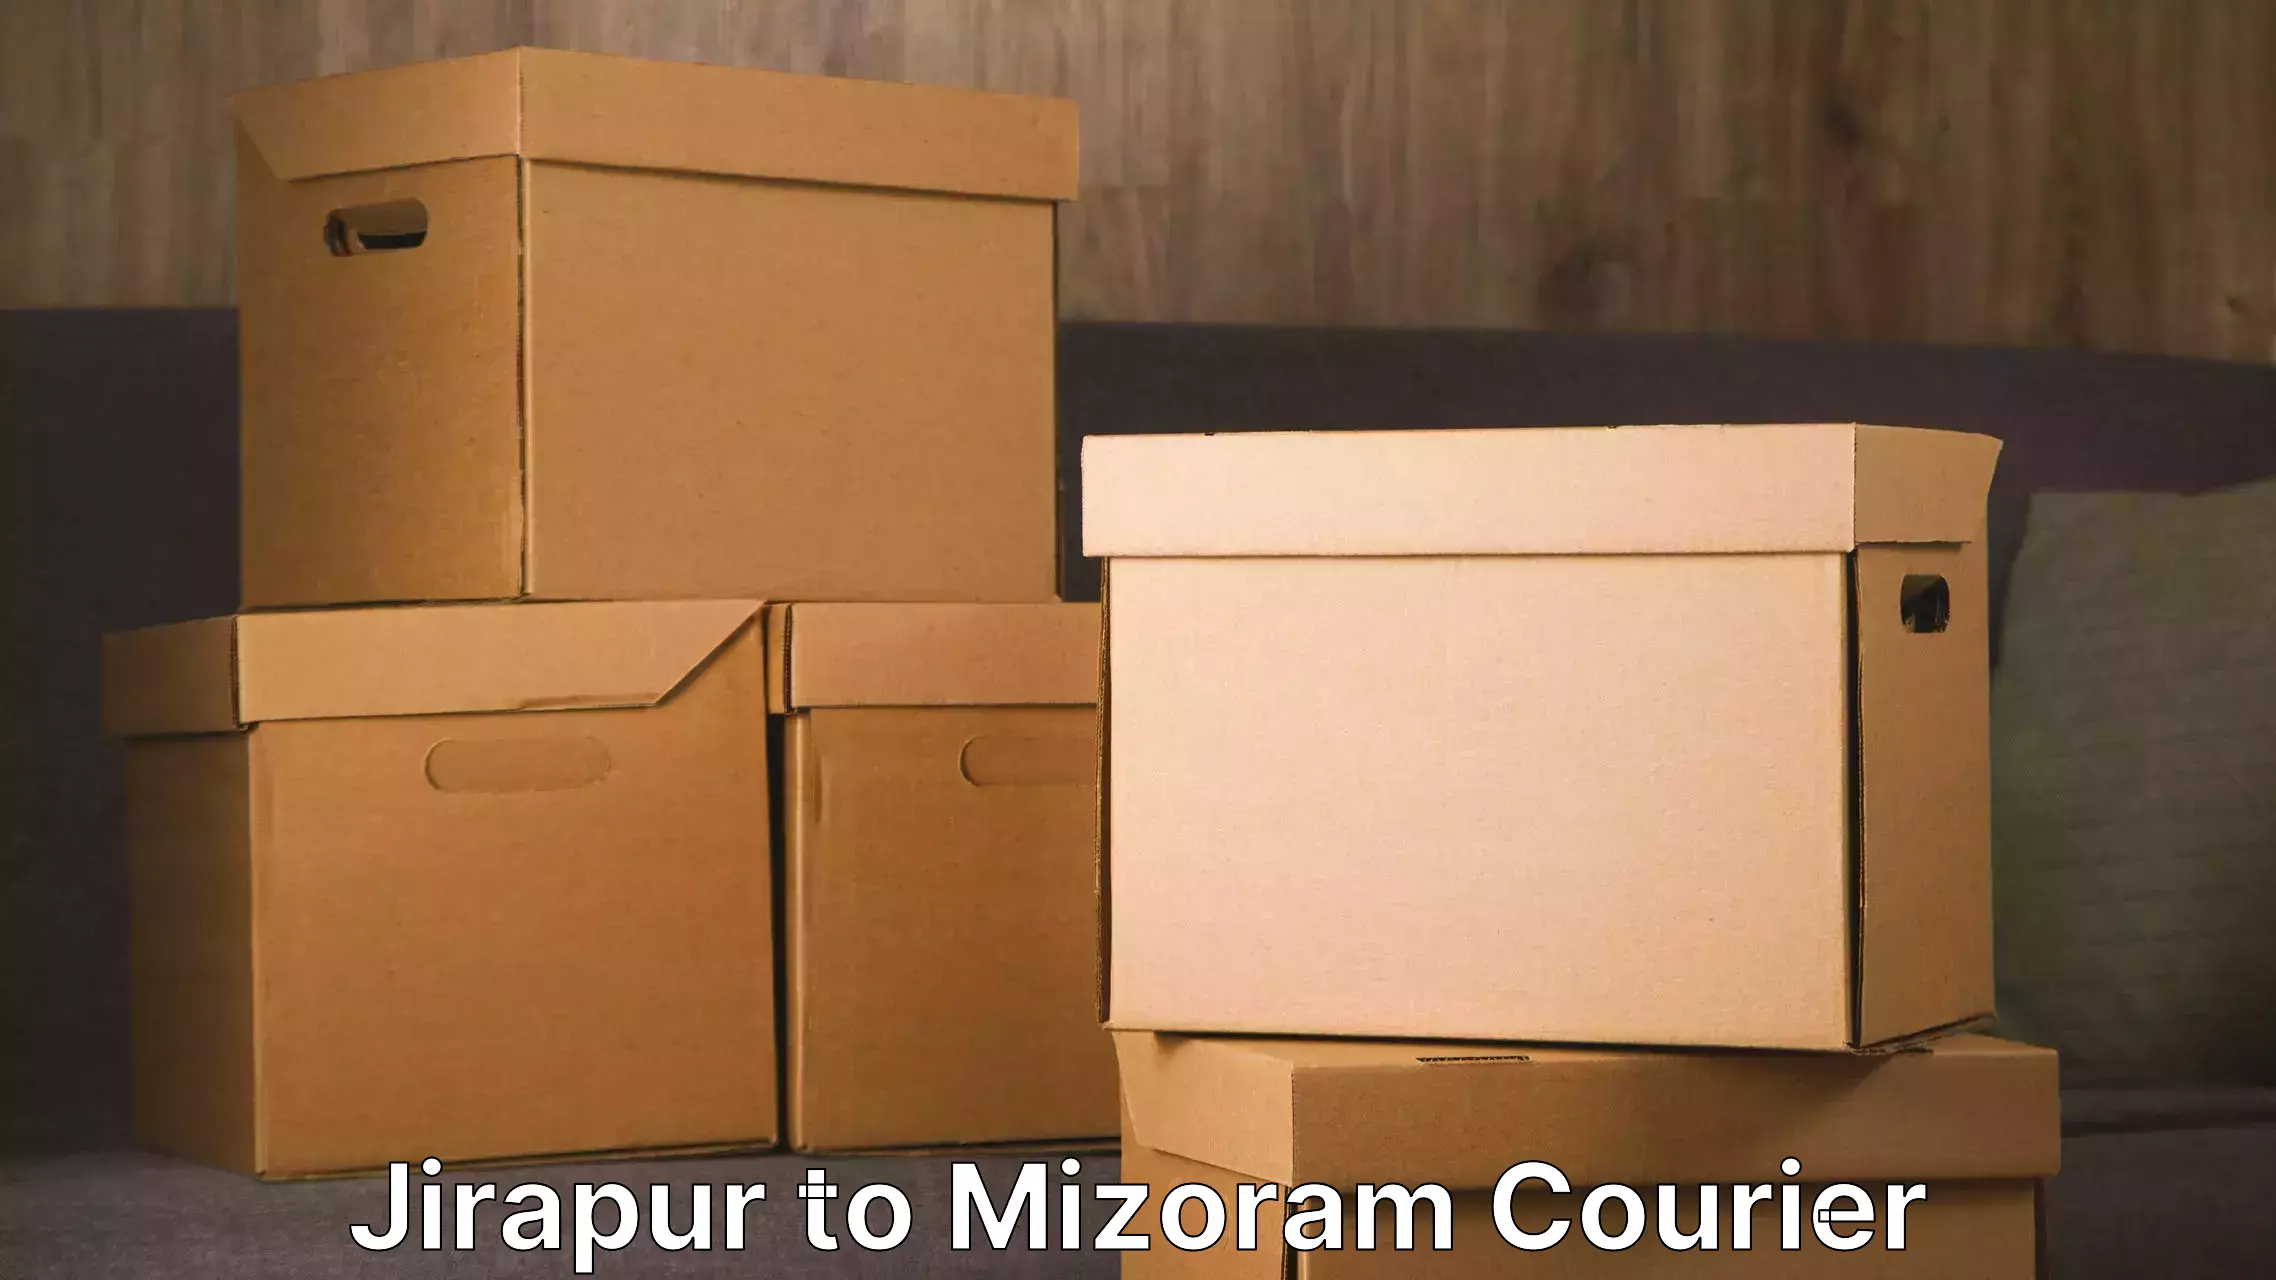 Hassle-free relocation Jirapur to Darlawn